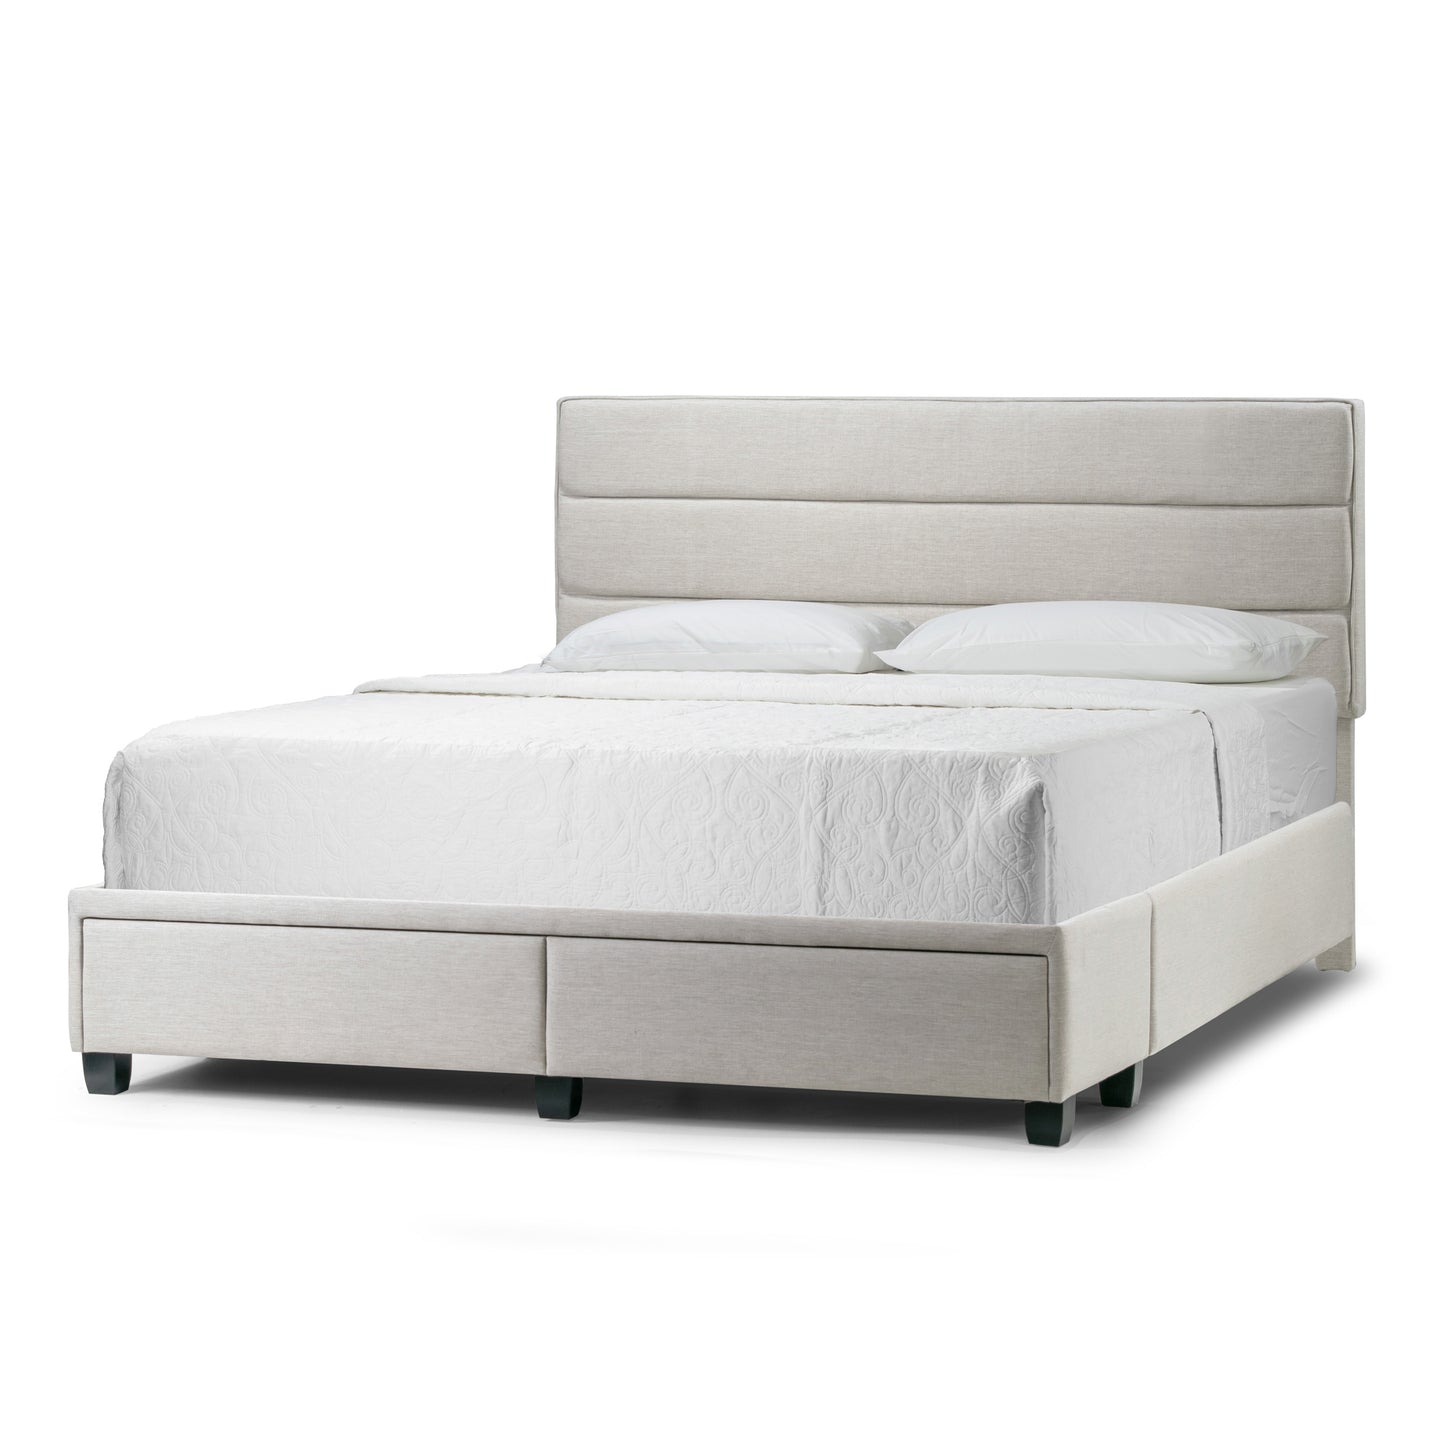 Arnia Beige Fabric Queen Bed Captain’s Bed with Two Storage Drawers